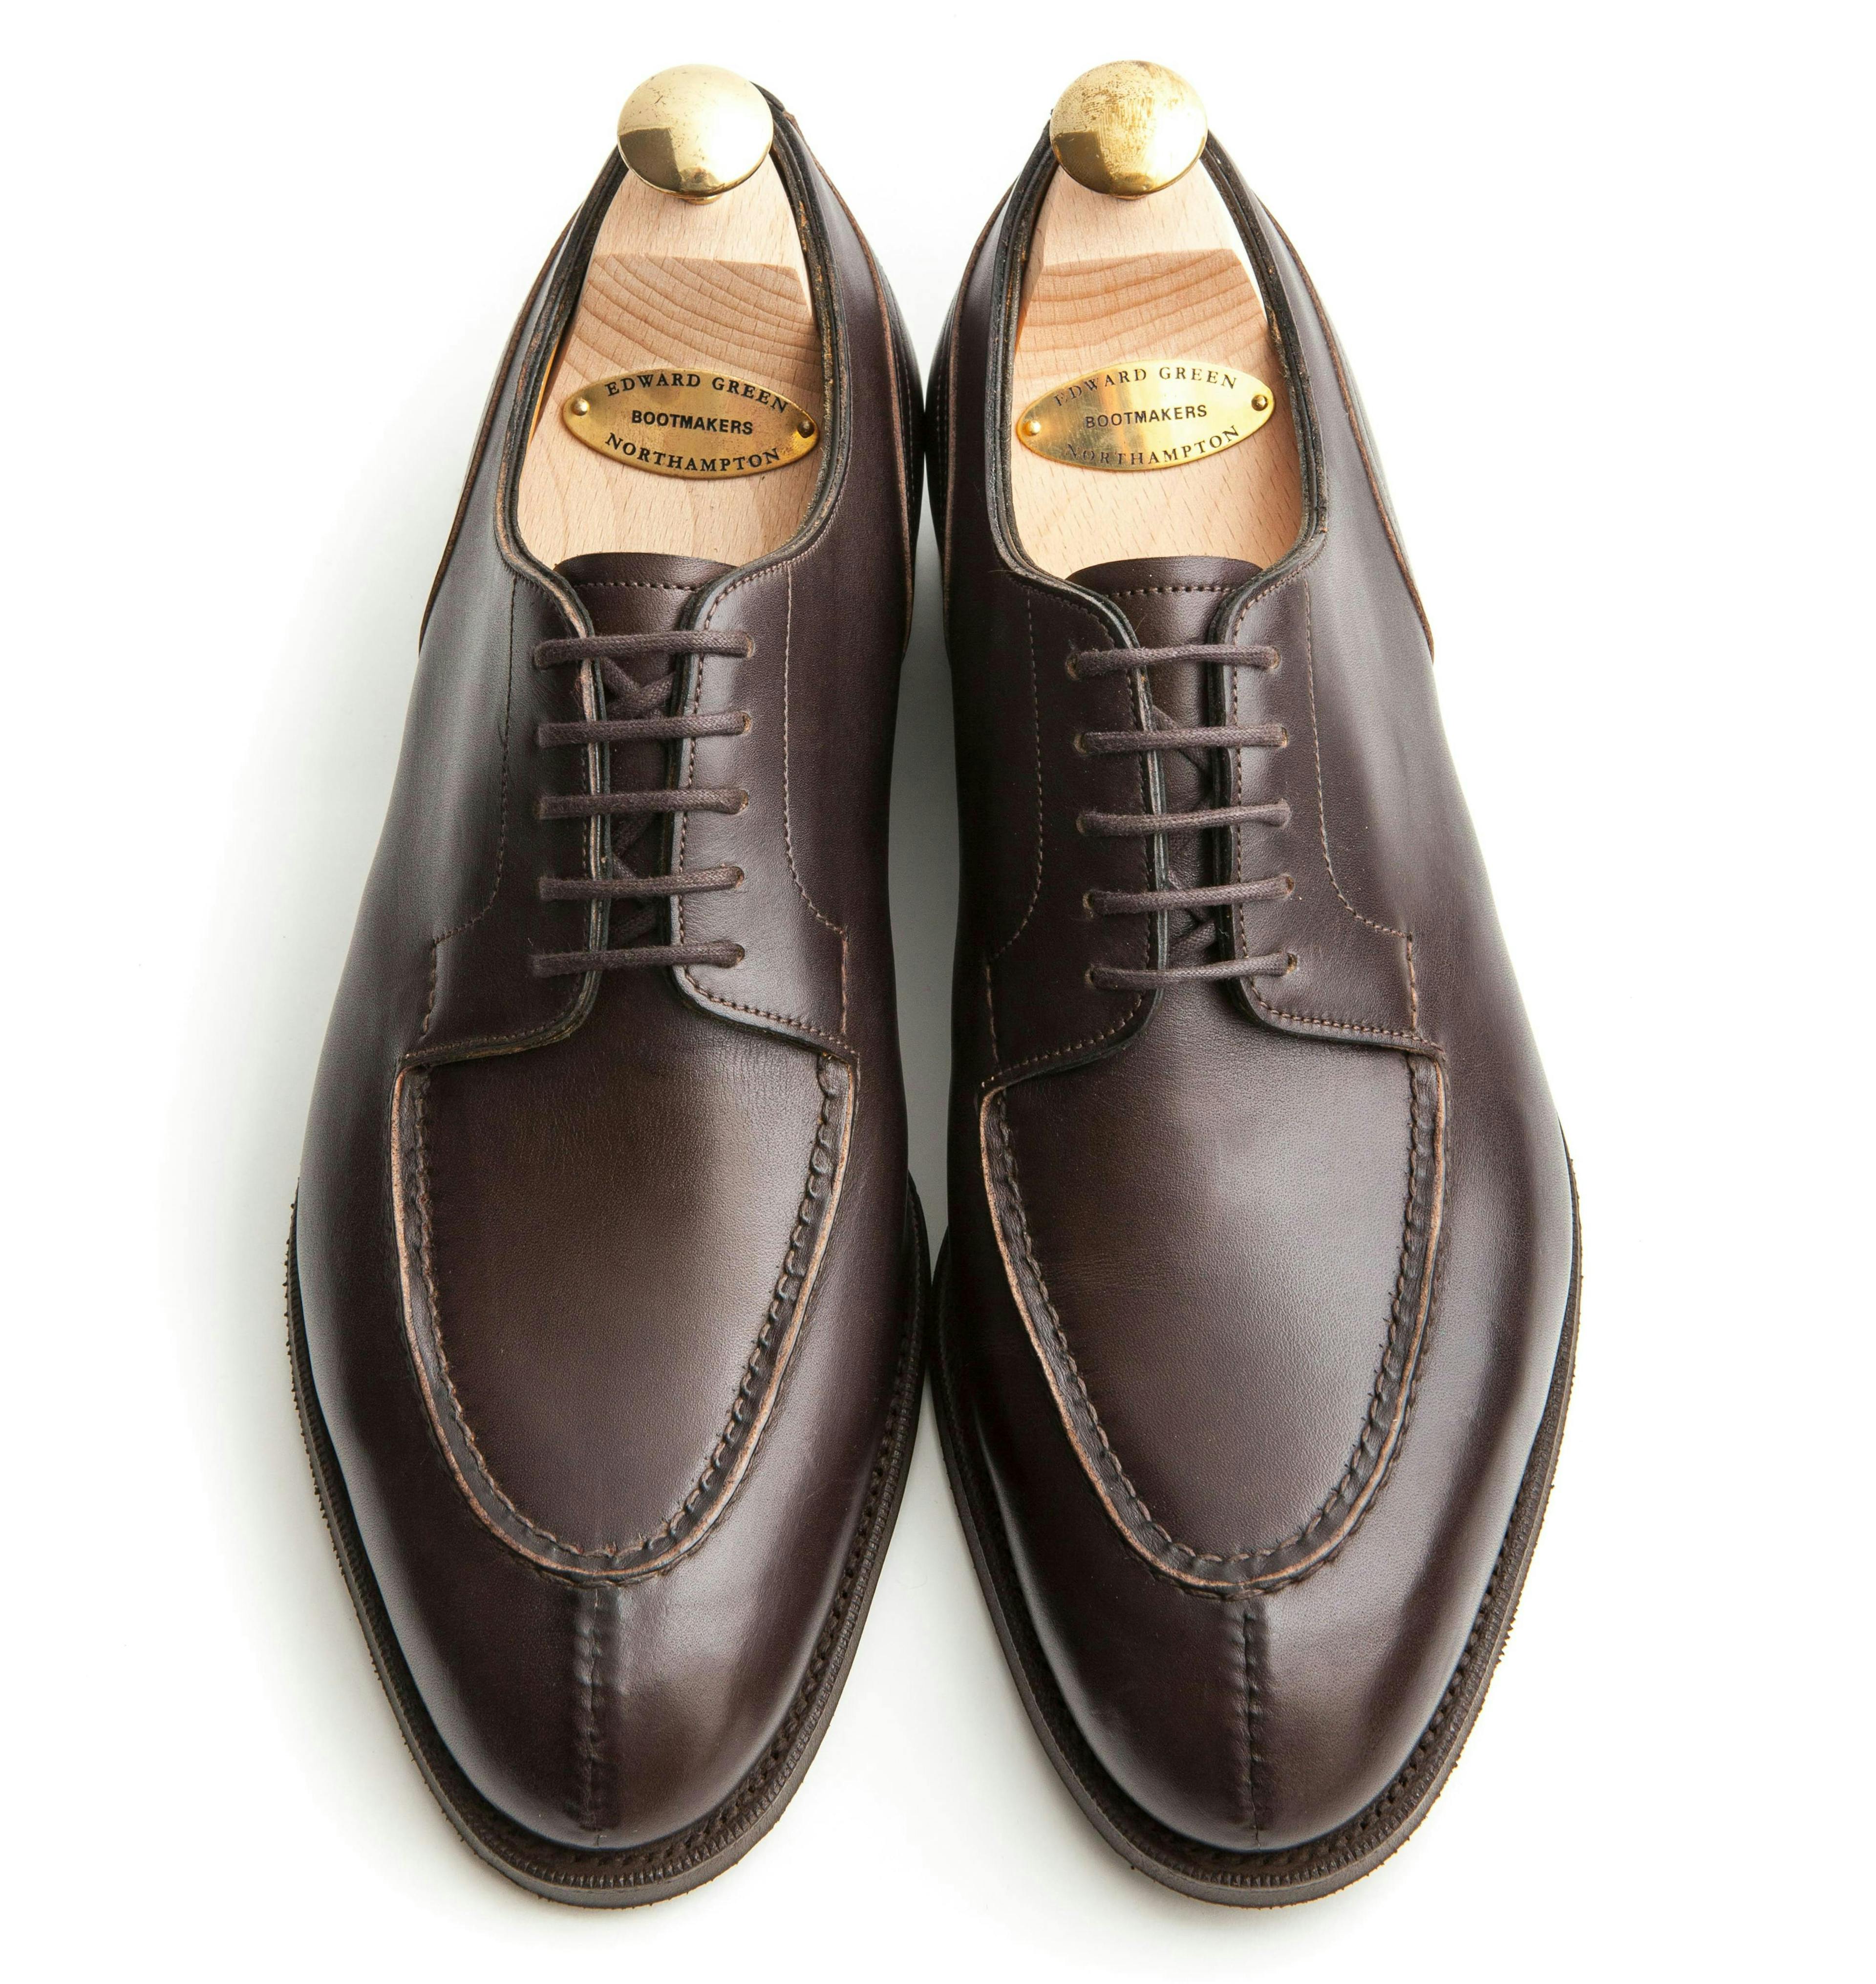 Edward Green Dover in Dark Brown Delapre, viewed from above.